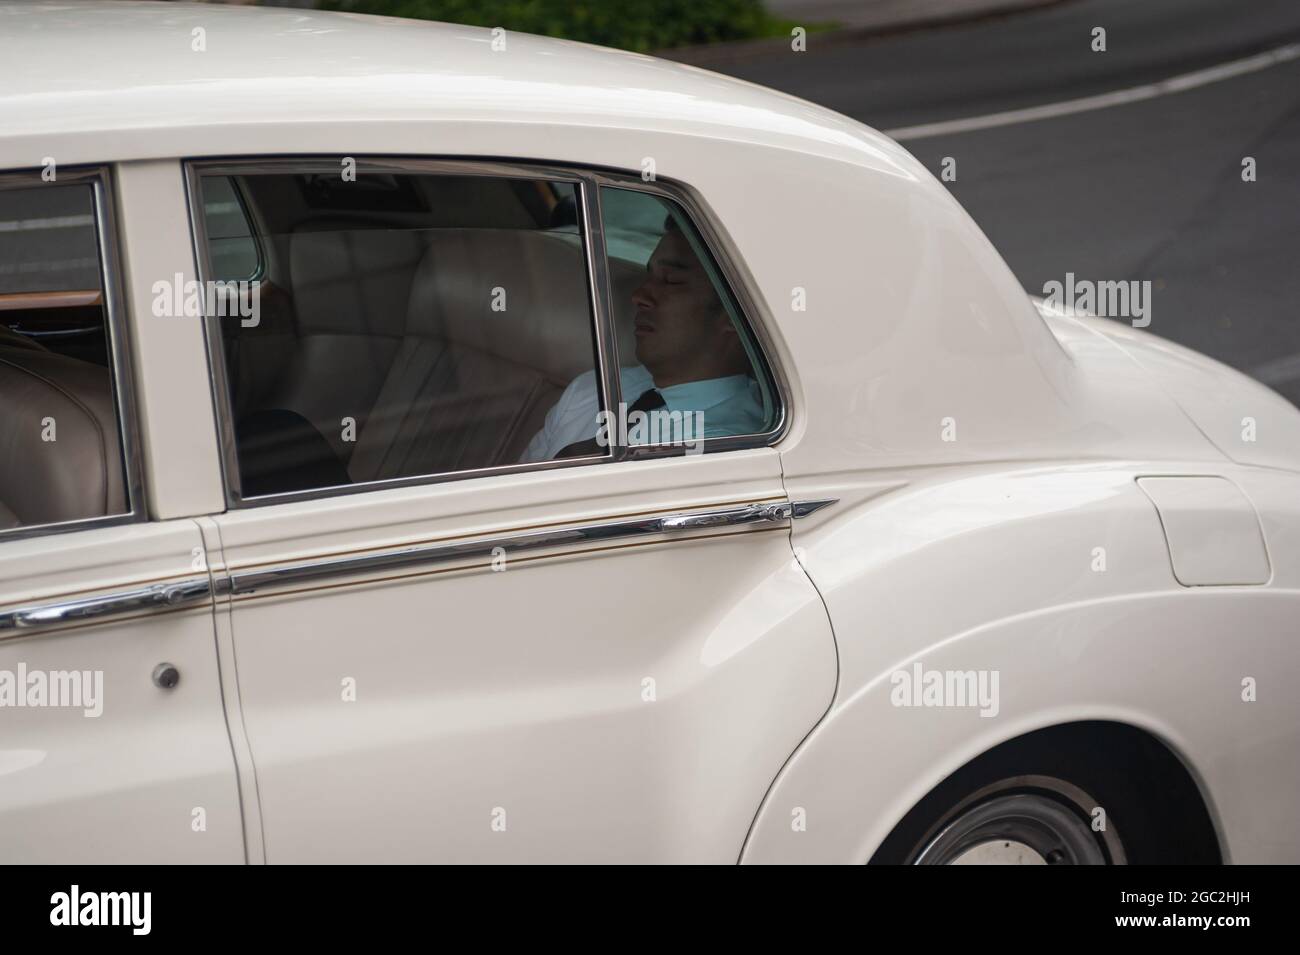 21.09.2019, Sydney, New South Wales, Australia - A man sits in the back seat of a luxury limousine and sleeps. Stock Photo